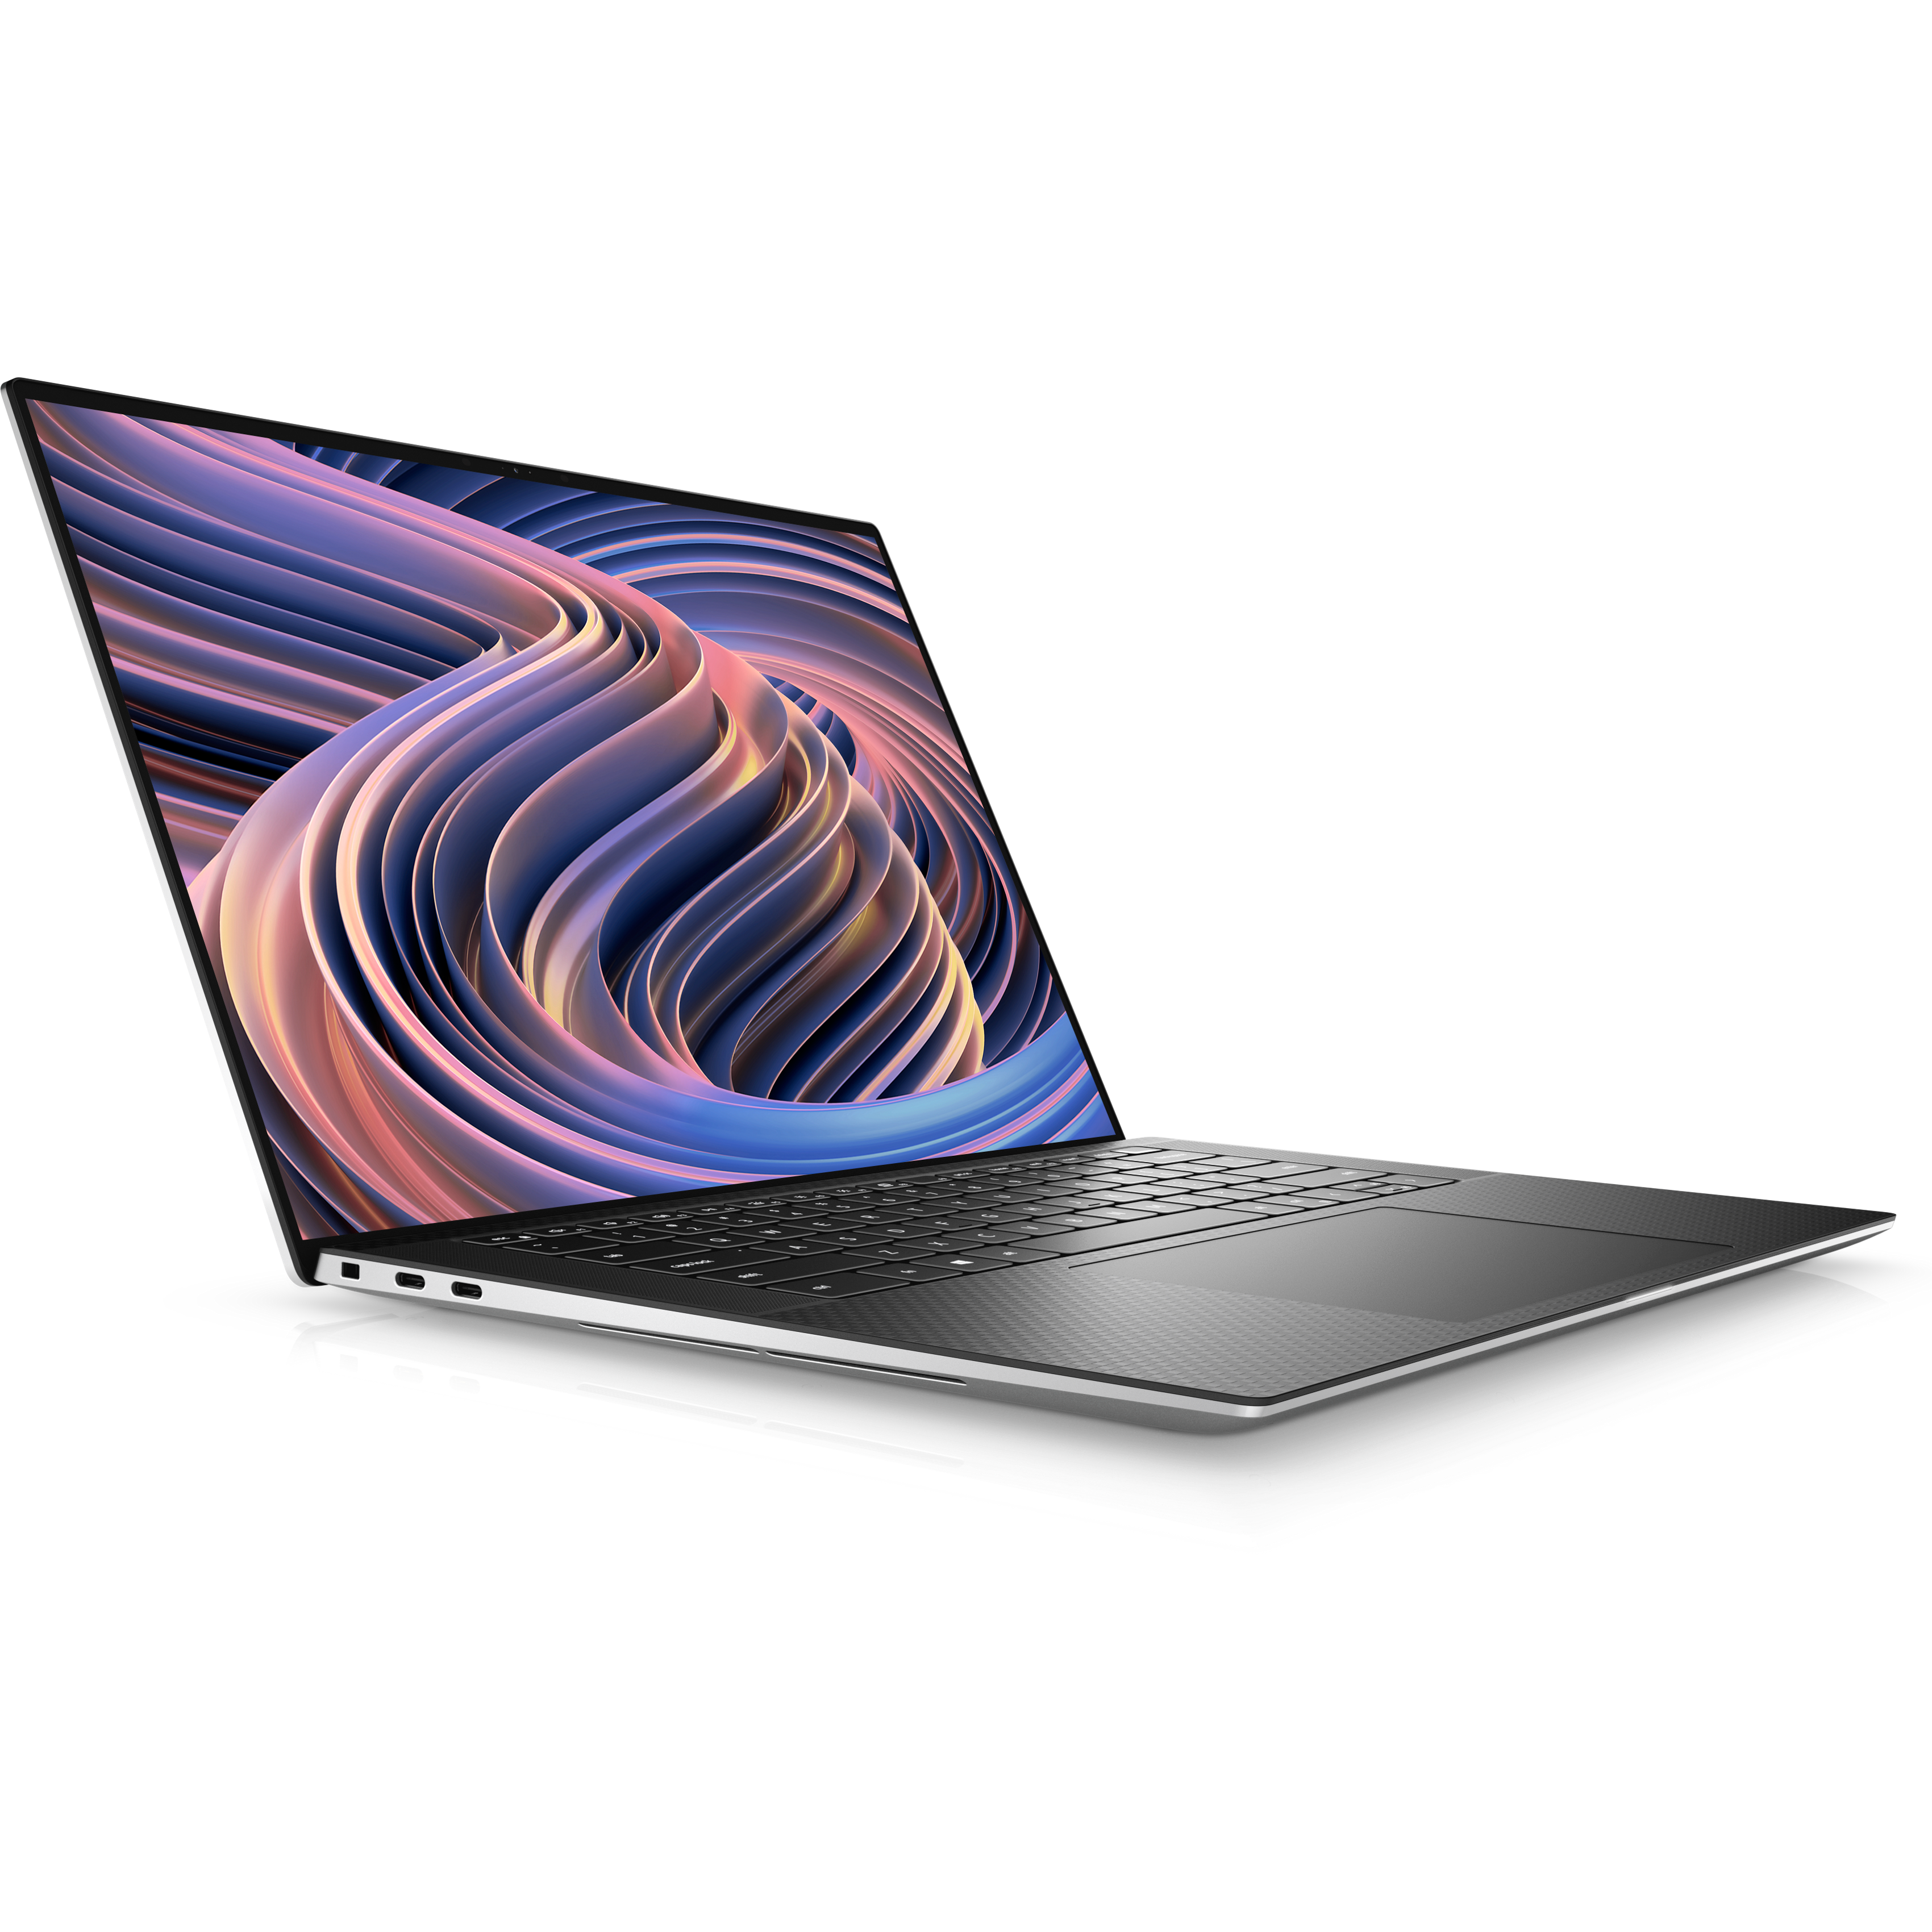 Angled front view of the Dell XPS 15 2022 facing right